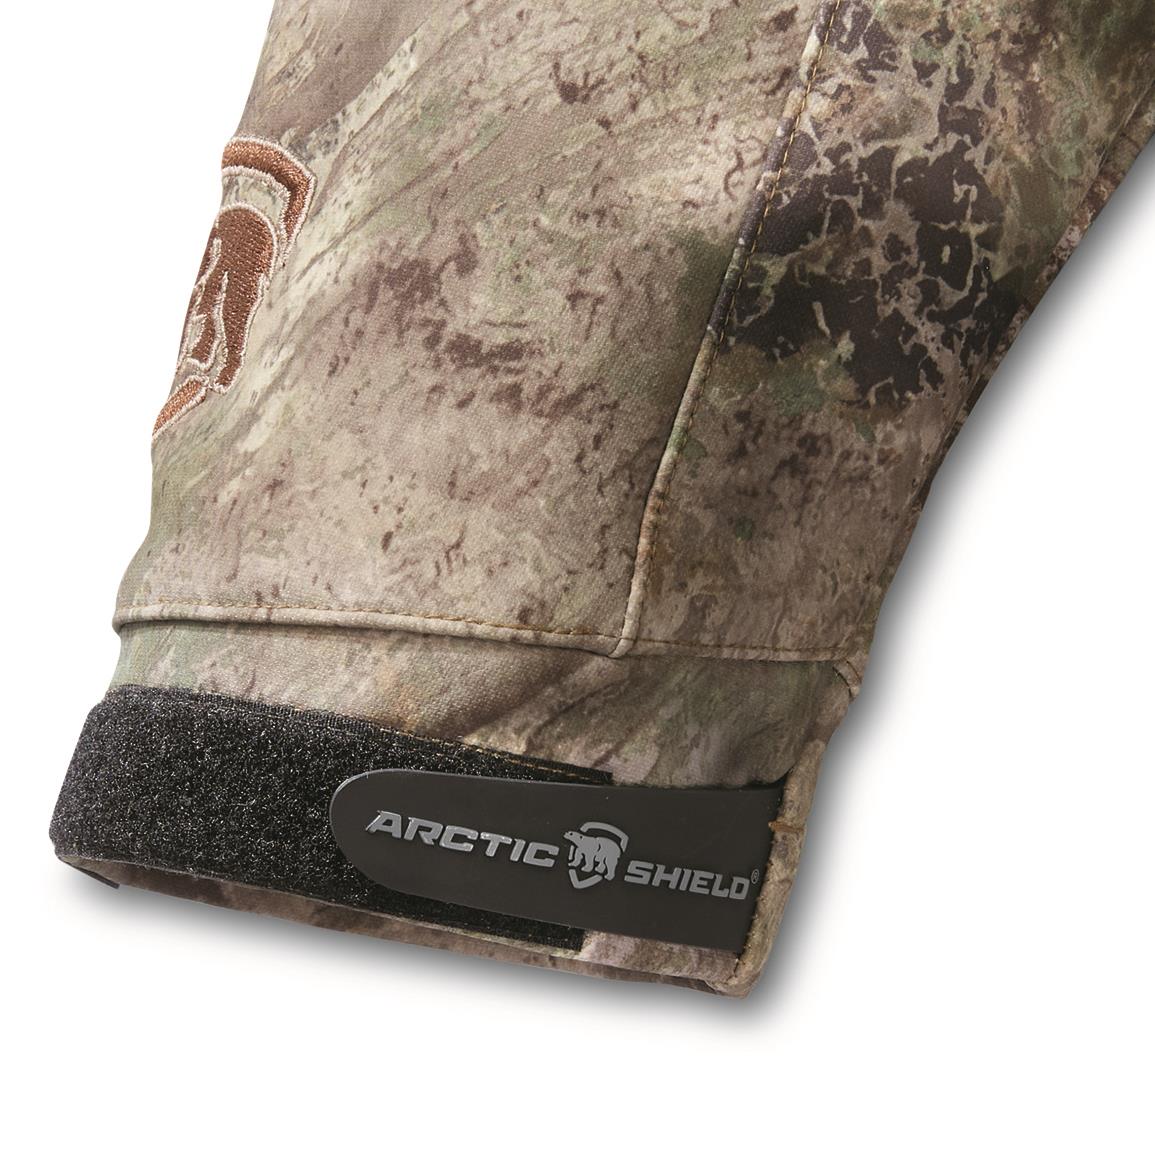 NOMAD Men's Barrier NXT Camo Jacket - 732616, Camo Jackets at Sportsman ...